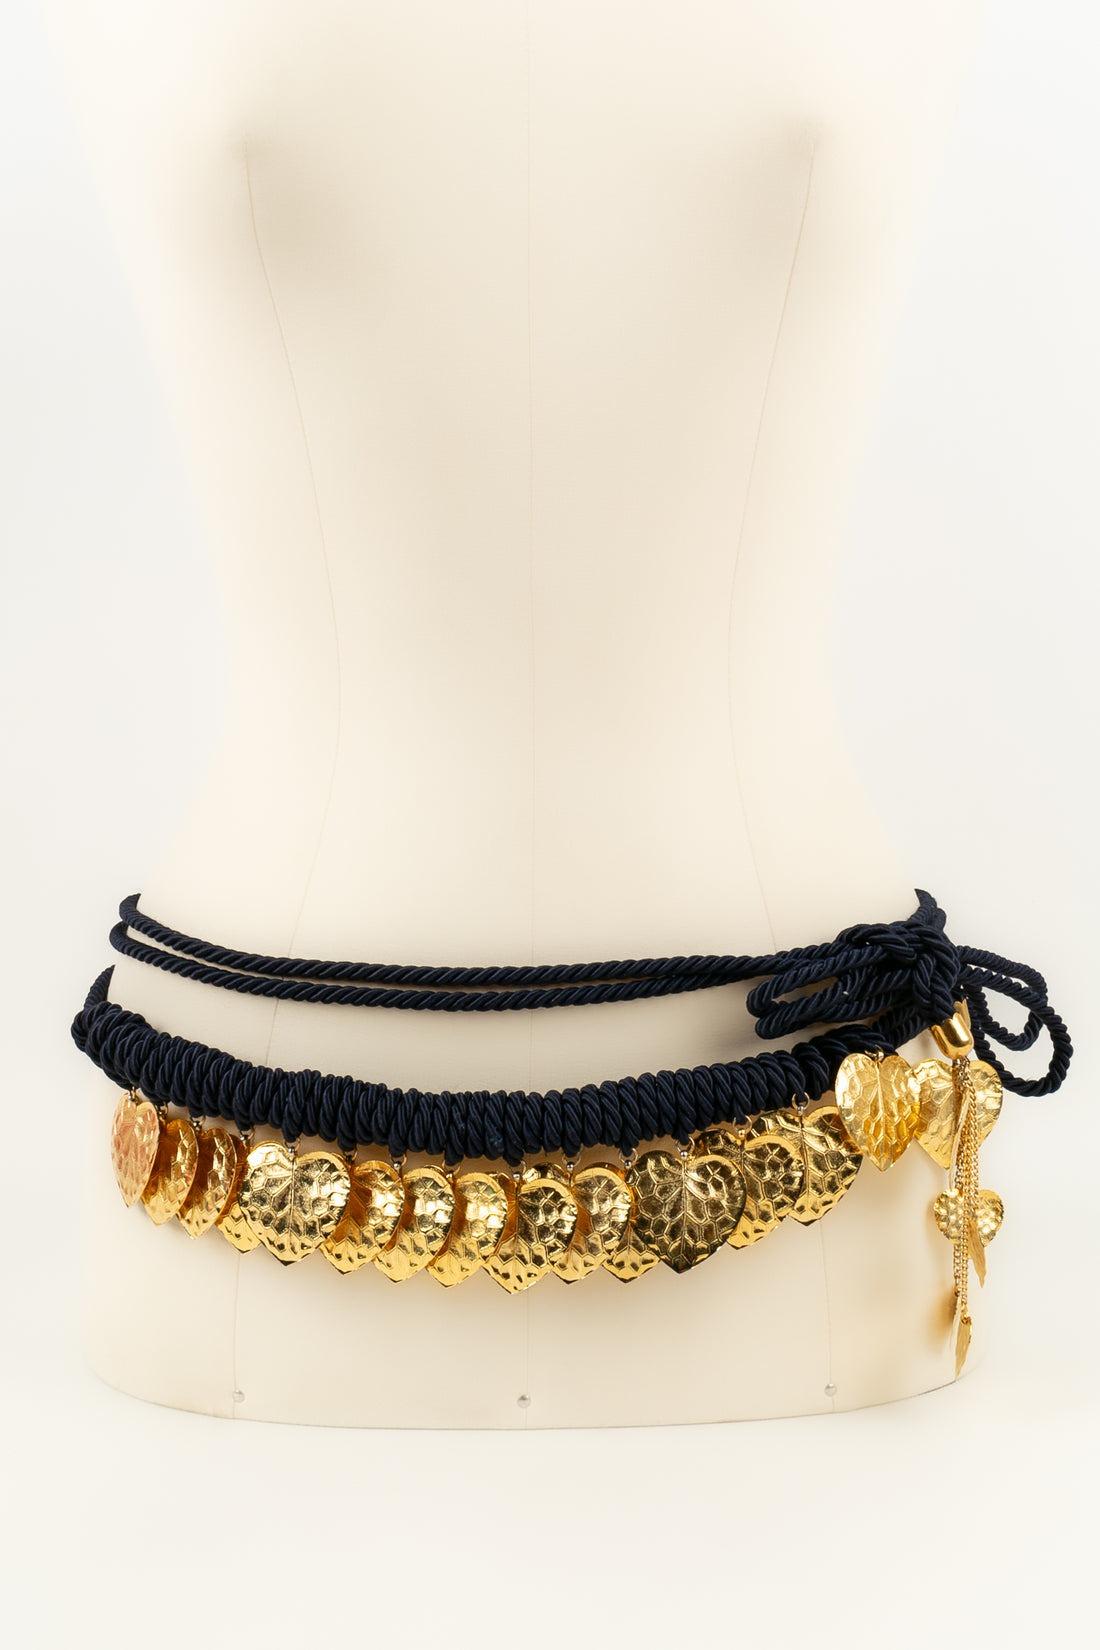  Yves Saint Laurent Belt(Credited to) in Navy Blue & Charms in Gold-Plated Metal For Sale 3